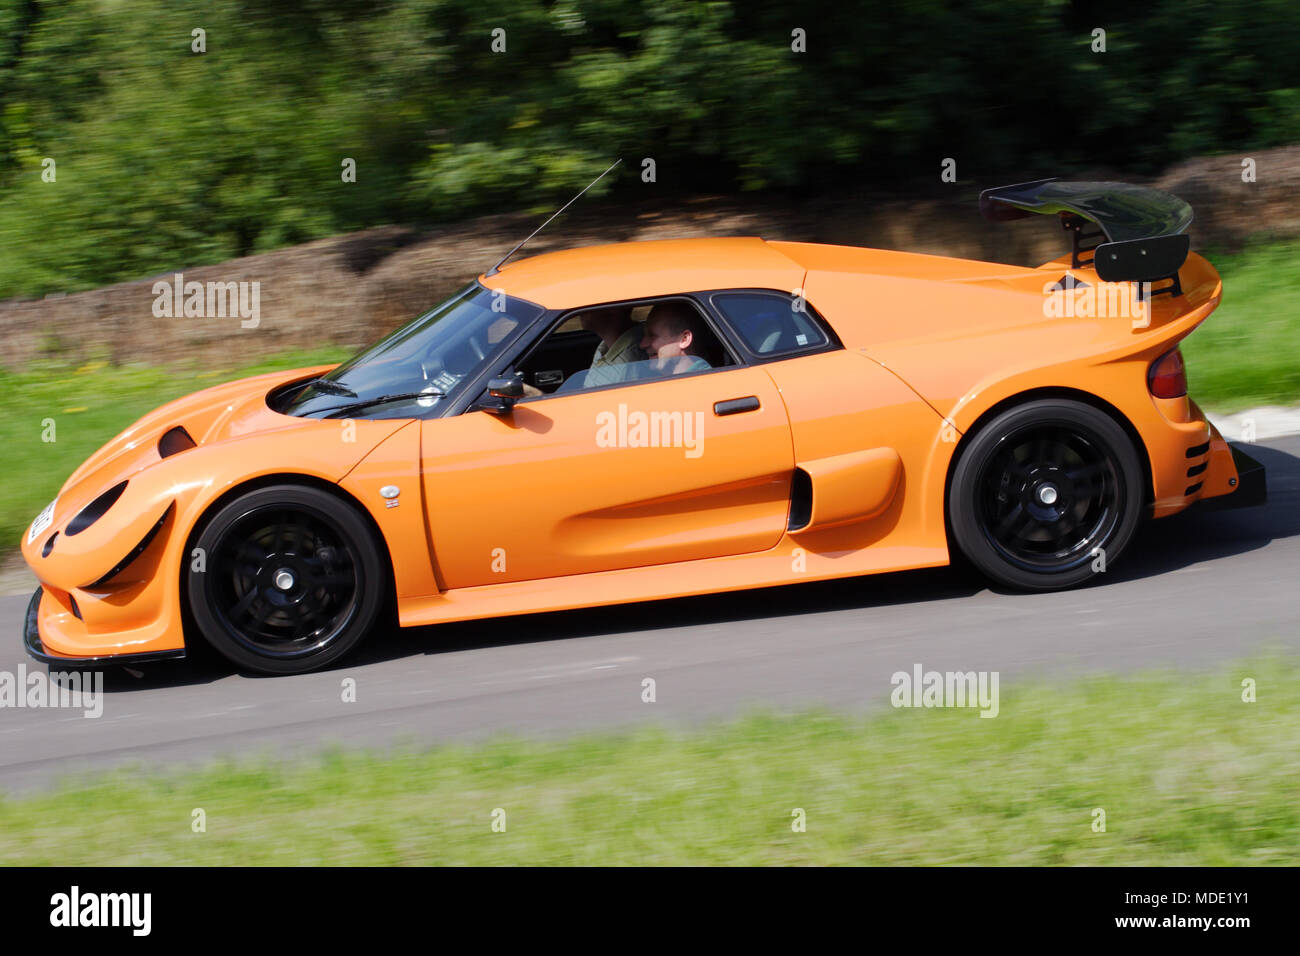 Profile (side view) of a fluorescent bright orange Noble M12 GT0-3R British supercar sports car driving fast or racing Stock Photo